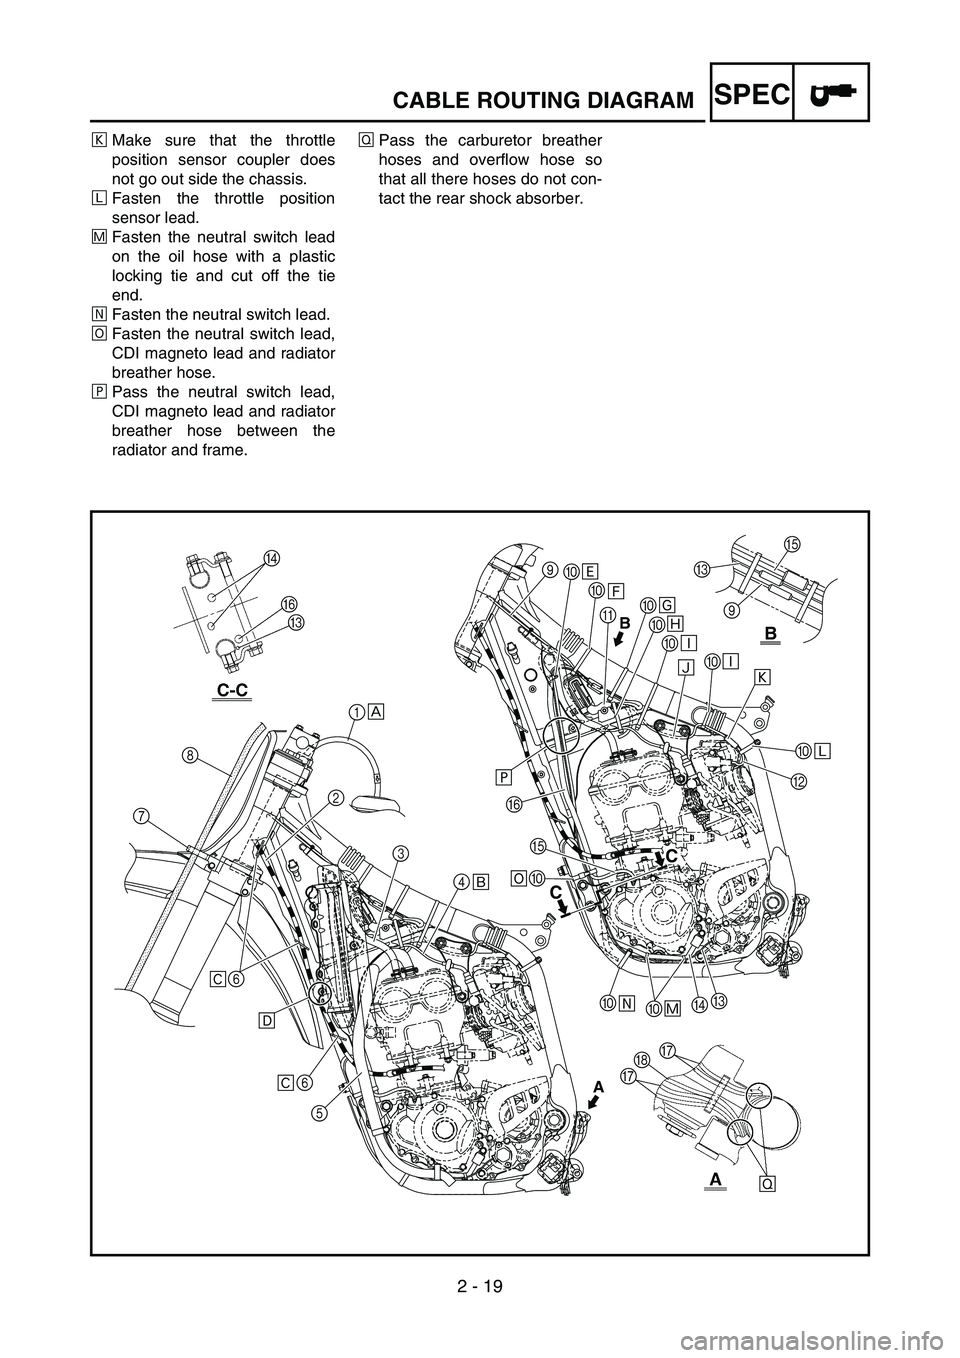 YAMAHA YZ250F 2005  Owners Manual 2 - 19
SPECCABLE ROUTING DIAGRAM
ÒMake sure that the throttle
position sensor coupler does
not go out side the chassis.
ÓFasten the throttle position
sensor lead.
ÔFasten the neutral switch lead
on